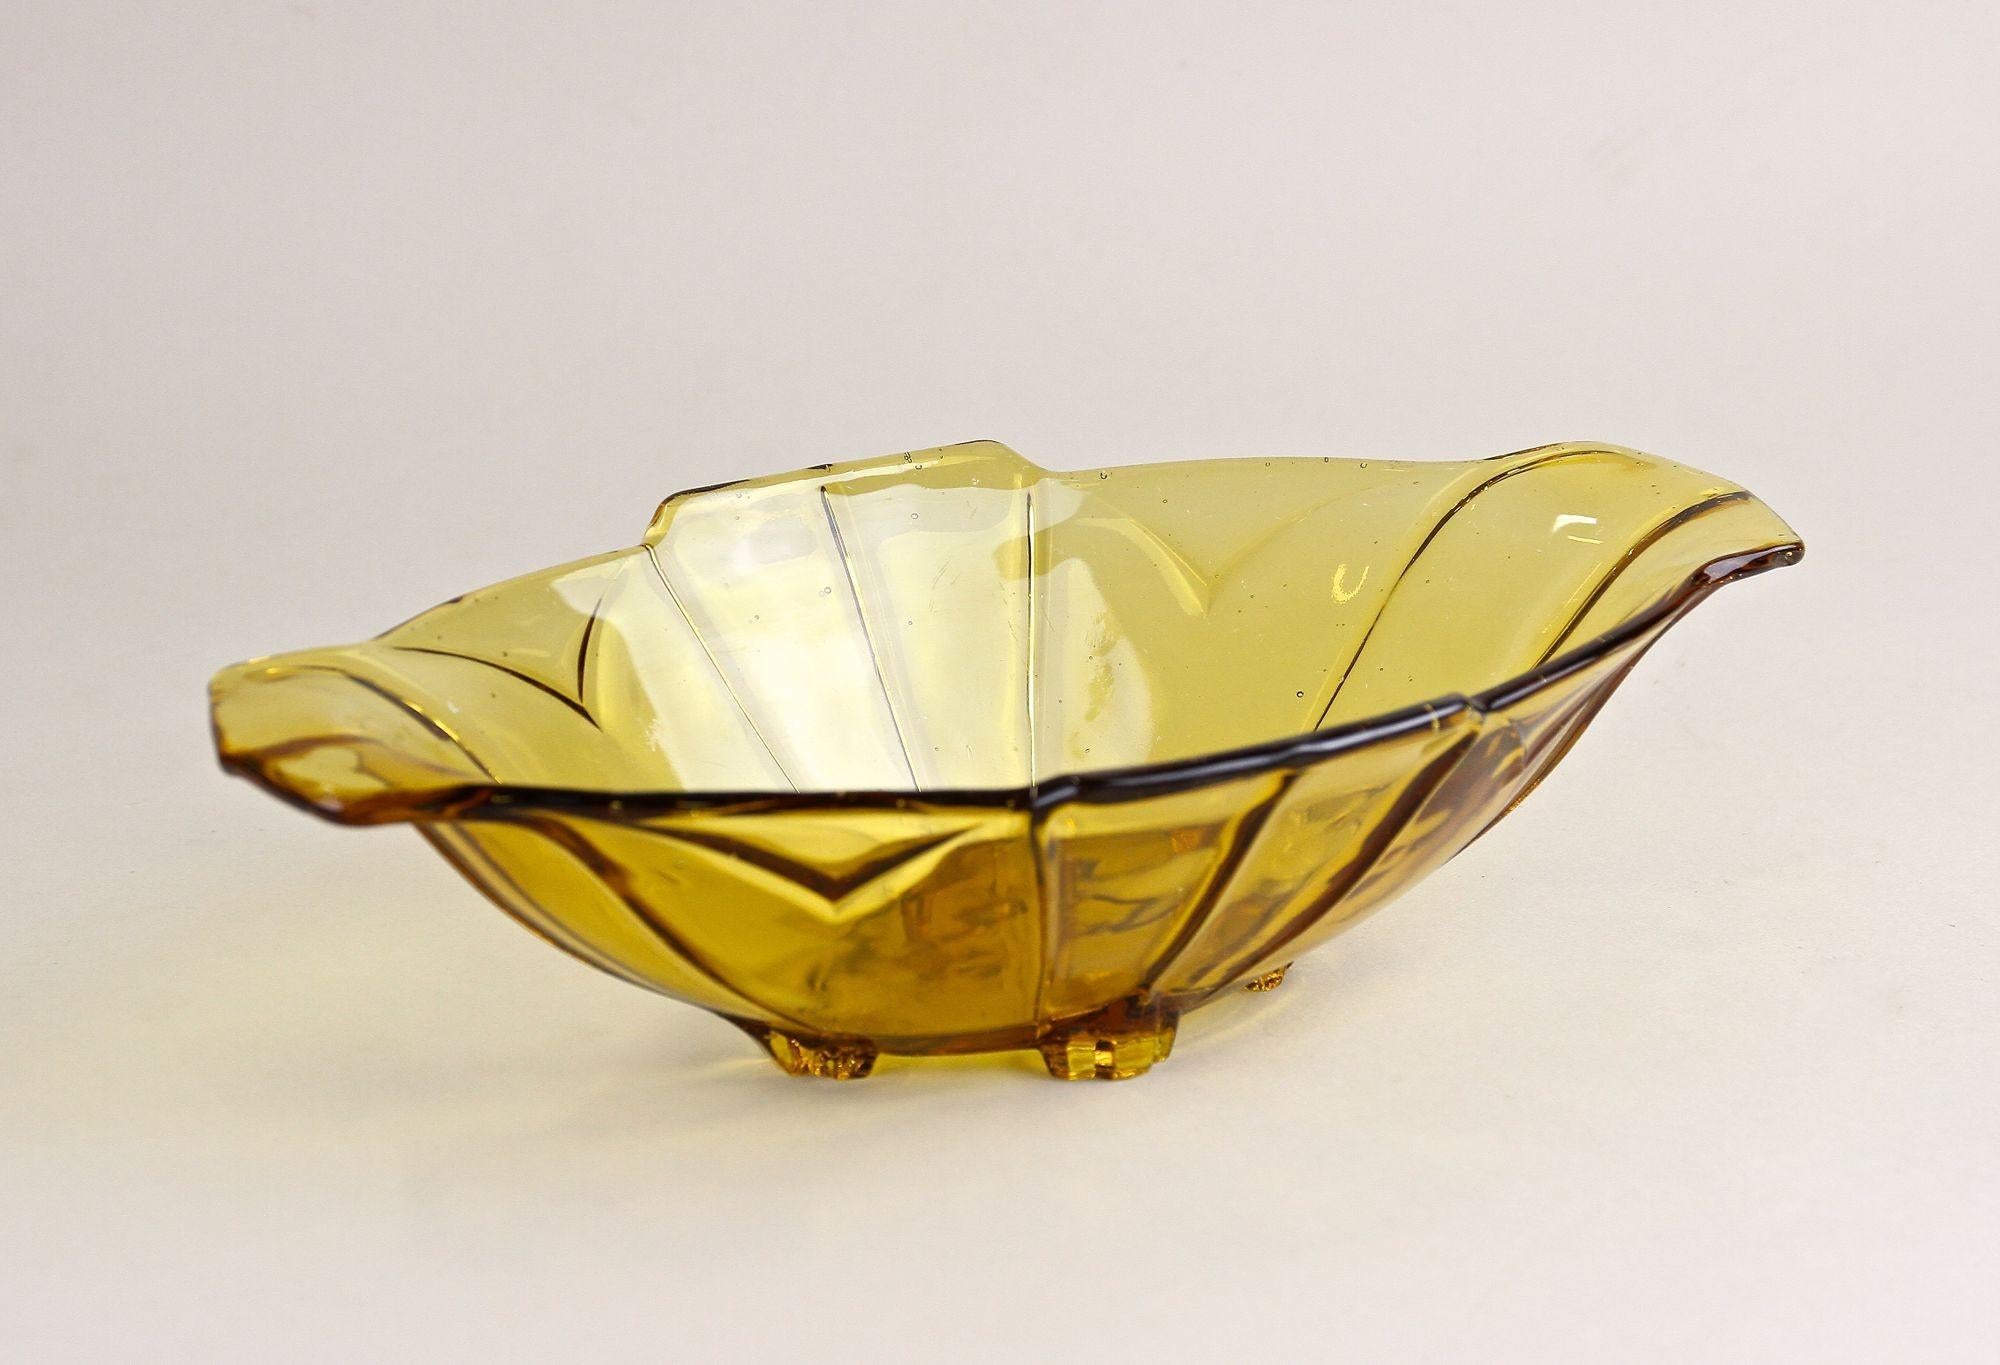 Lovely amber colored Art Deco glass jardiniere or glass bowl from the period around 1920 in Austria. Showing a fantastic yellow/brown color tone, this very decorative glass item impresses with a beautiful shape adorned by unique design elements. The